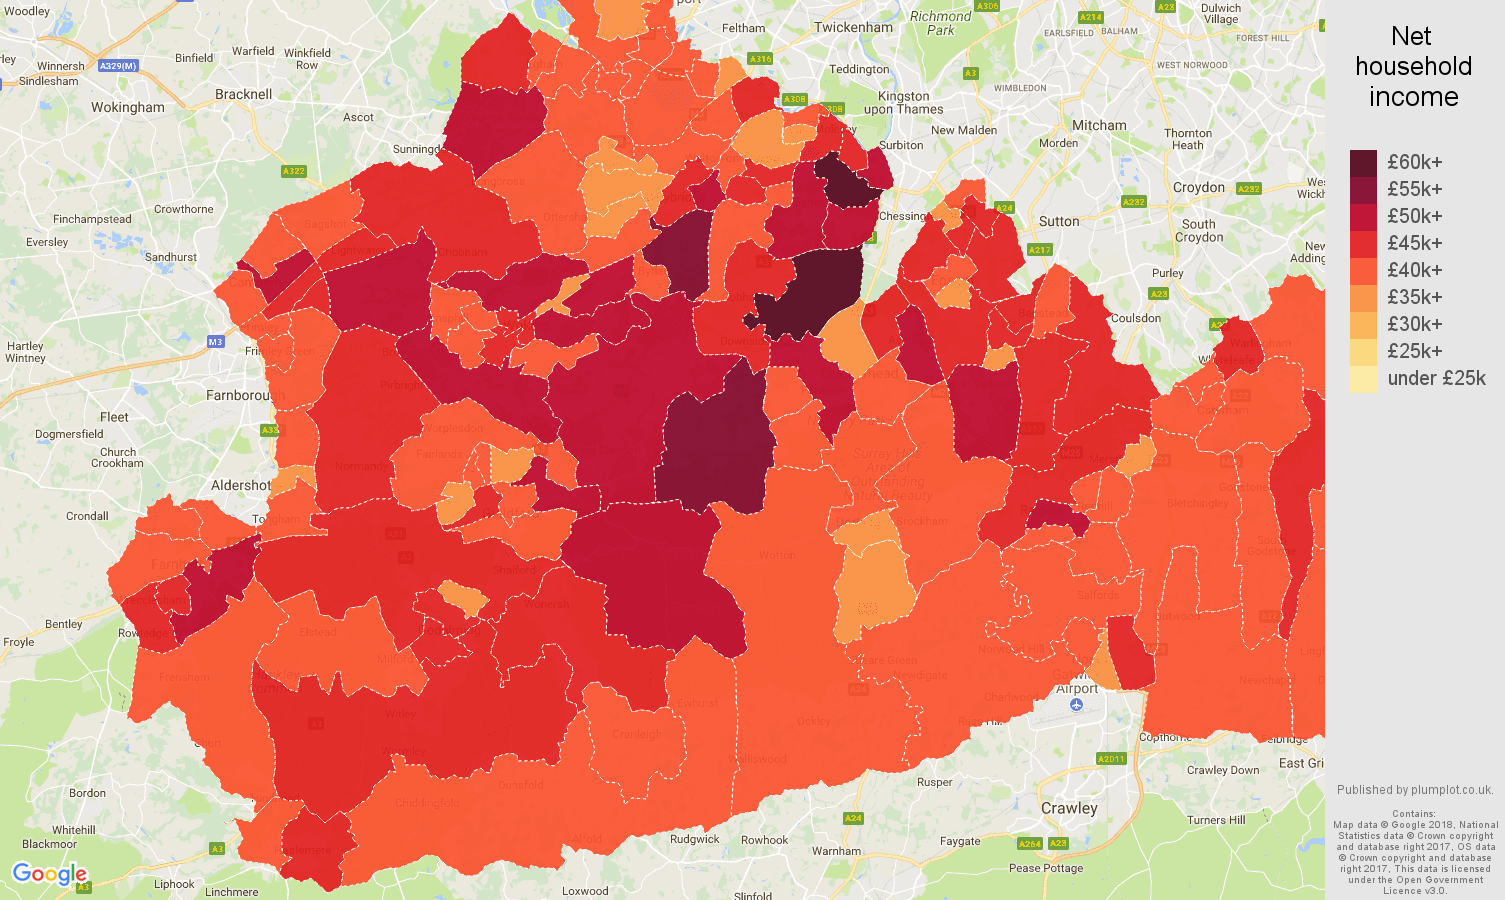 Surrey net household income map